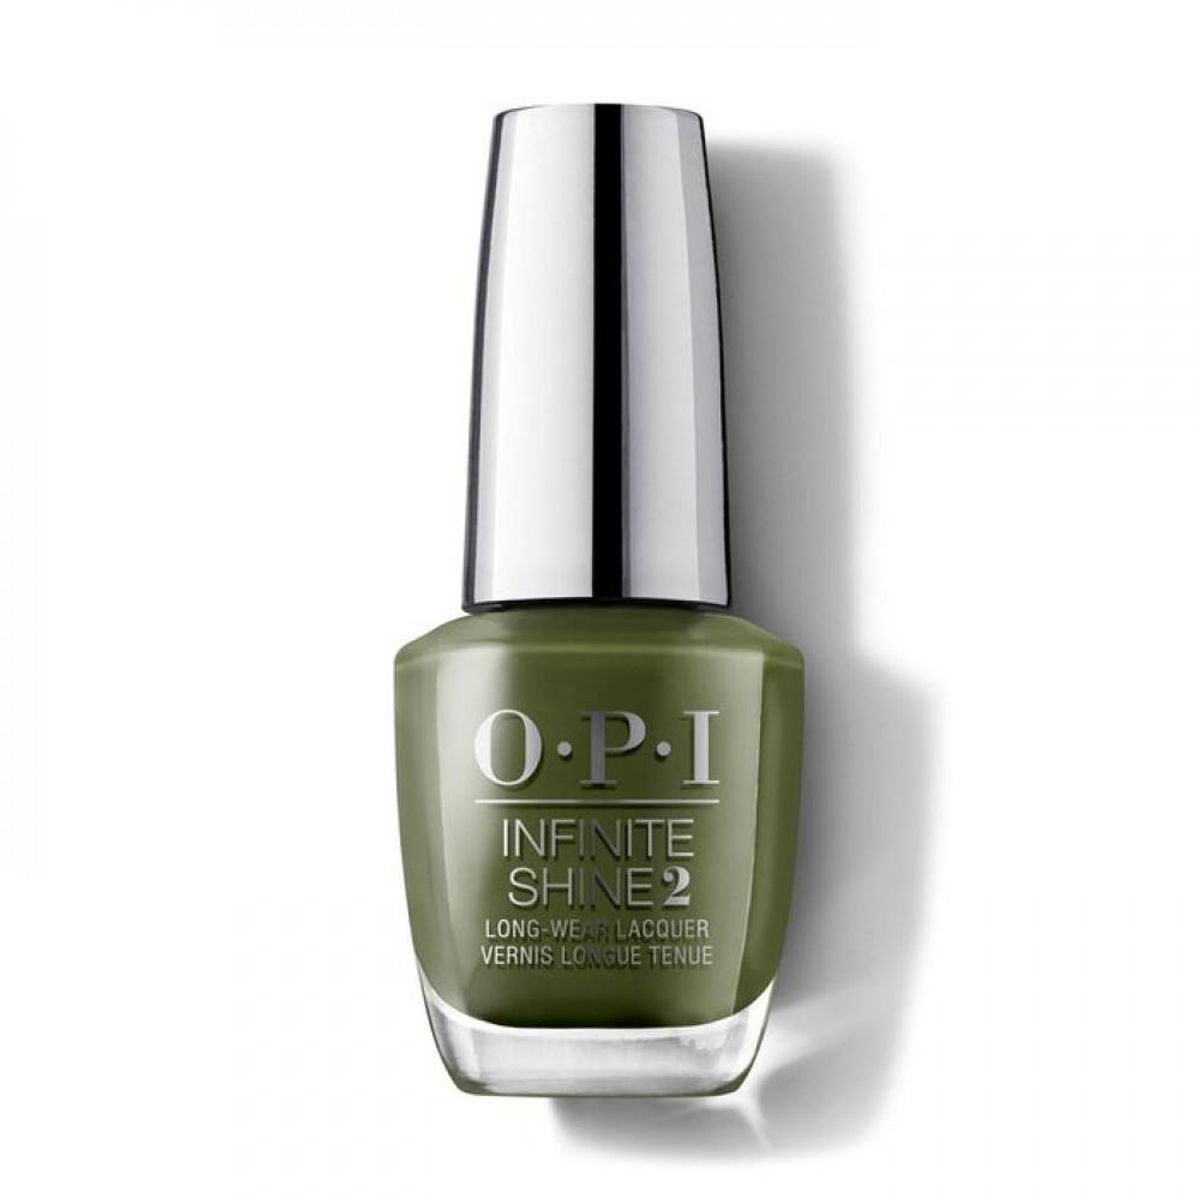 Infinite Shine Long-Wear Nail Polish in Olive for Green